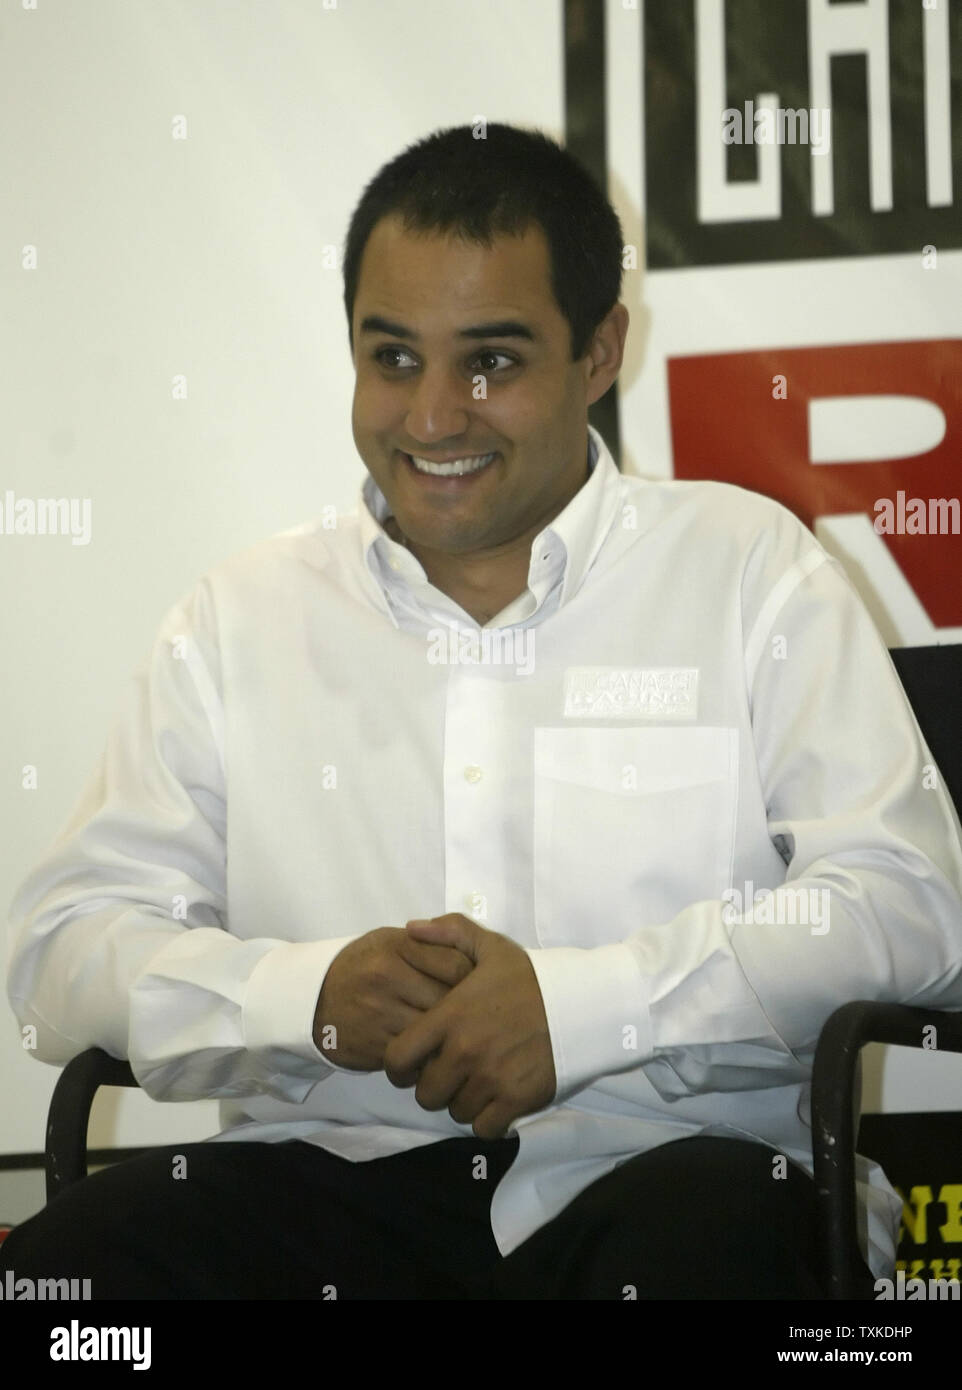 NASCAR driver Juan Pablo Montoya of Colombia smiles during a press conference at Chip Ganassi Racing in Concord, NC on January 22, 2007 during the NASCAR NEXTEL Cup Media Tour. (UPI Photo/Nell Redmond) Stock Photo